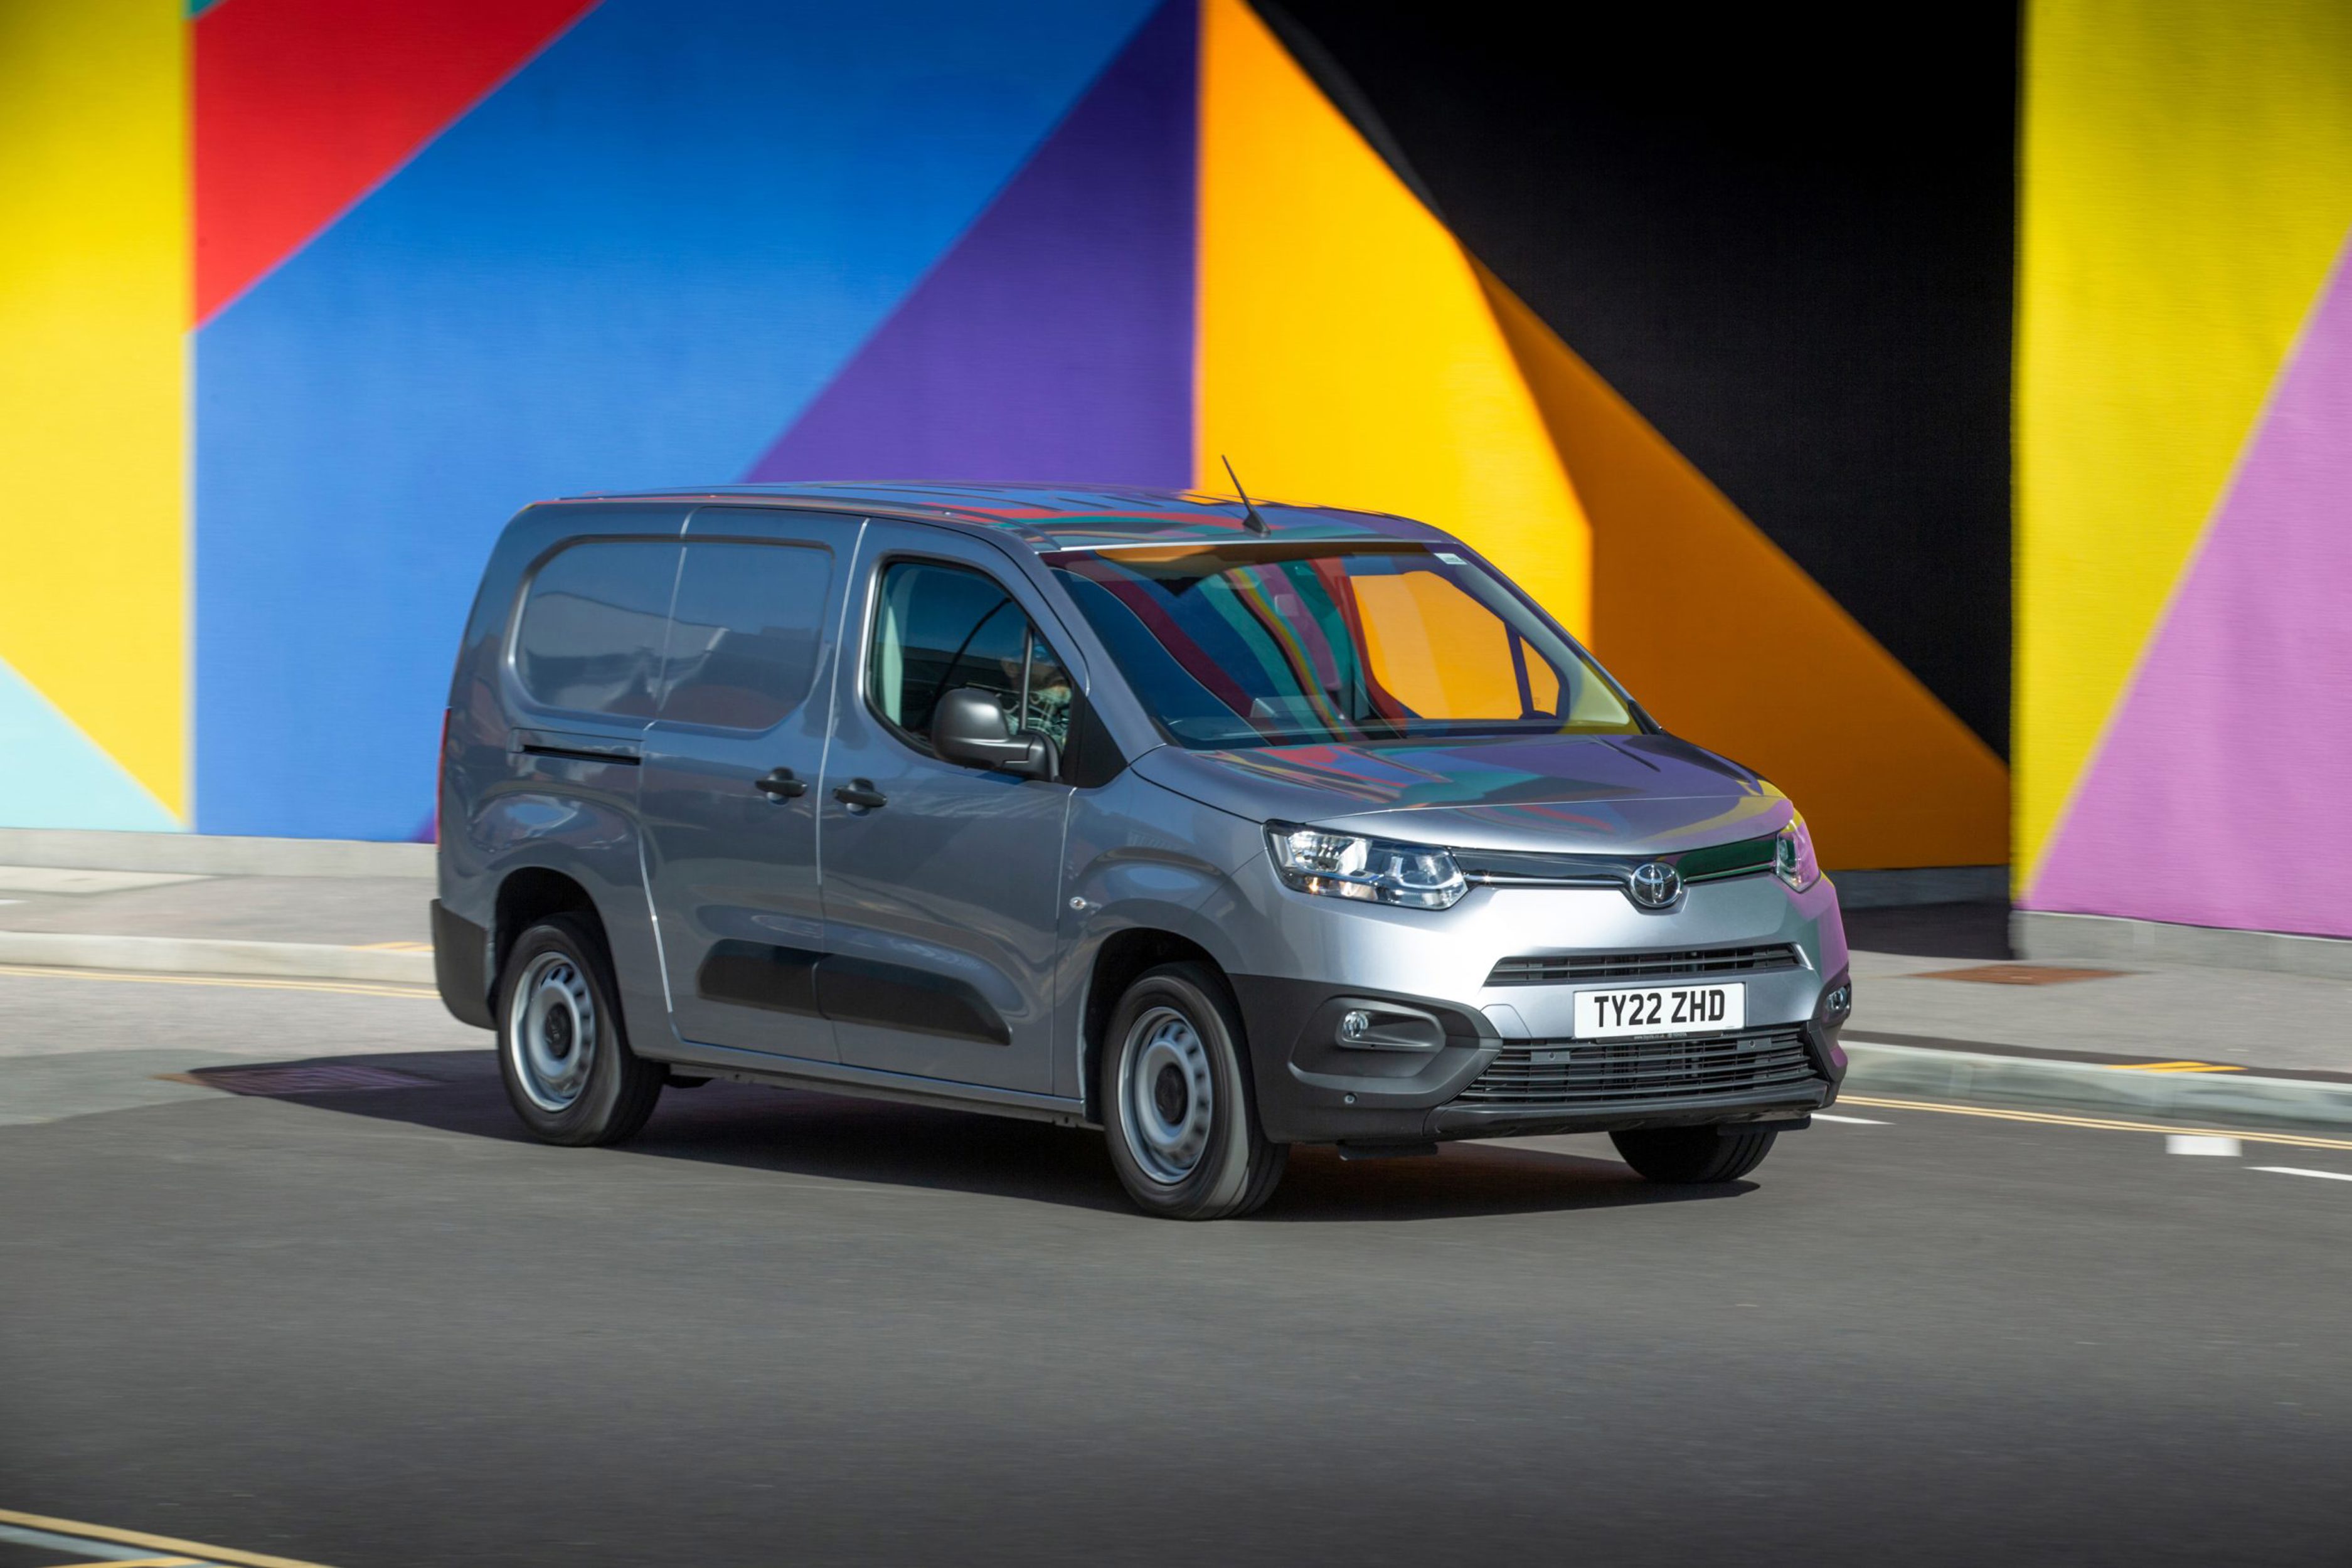 Great Britain: The MAN TGE has been crowned 2021 Best Large Van at the  Parkers Awards